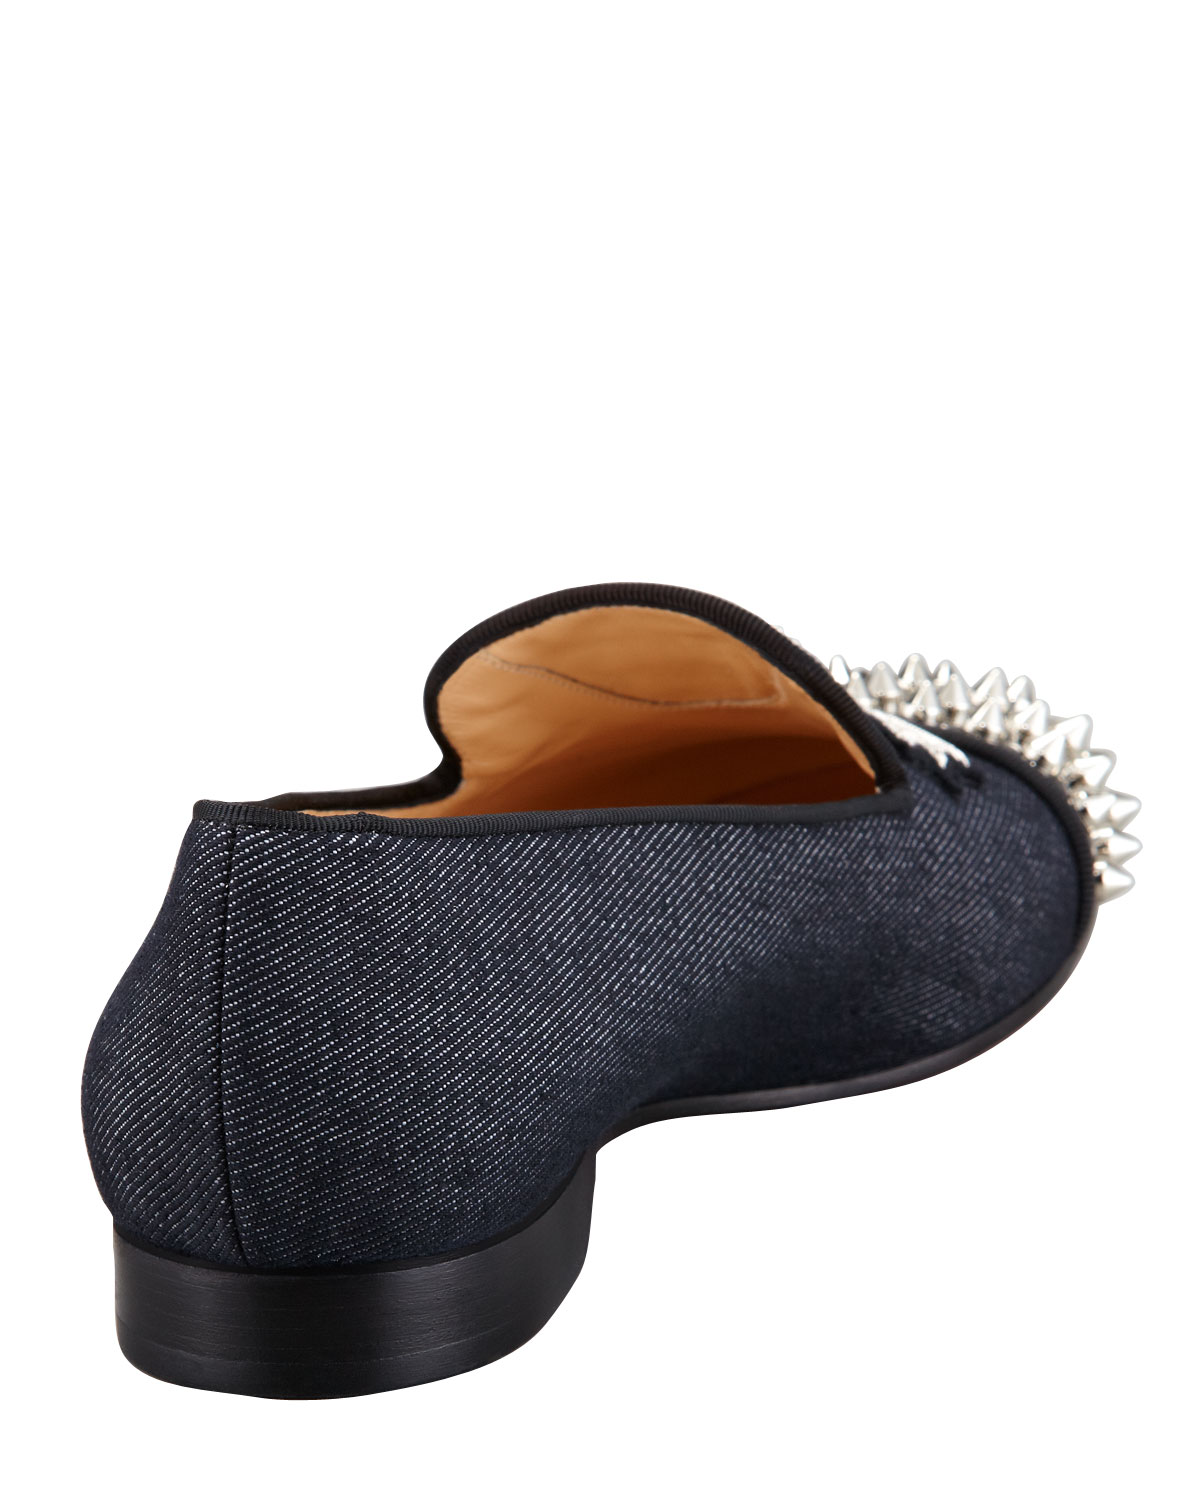 Christian Louboutin Intern Spiked Captoe Denim Red Sole Loafer in Blue - Lyst